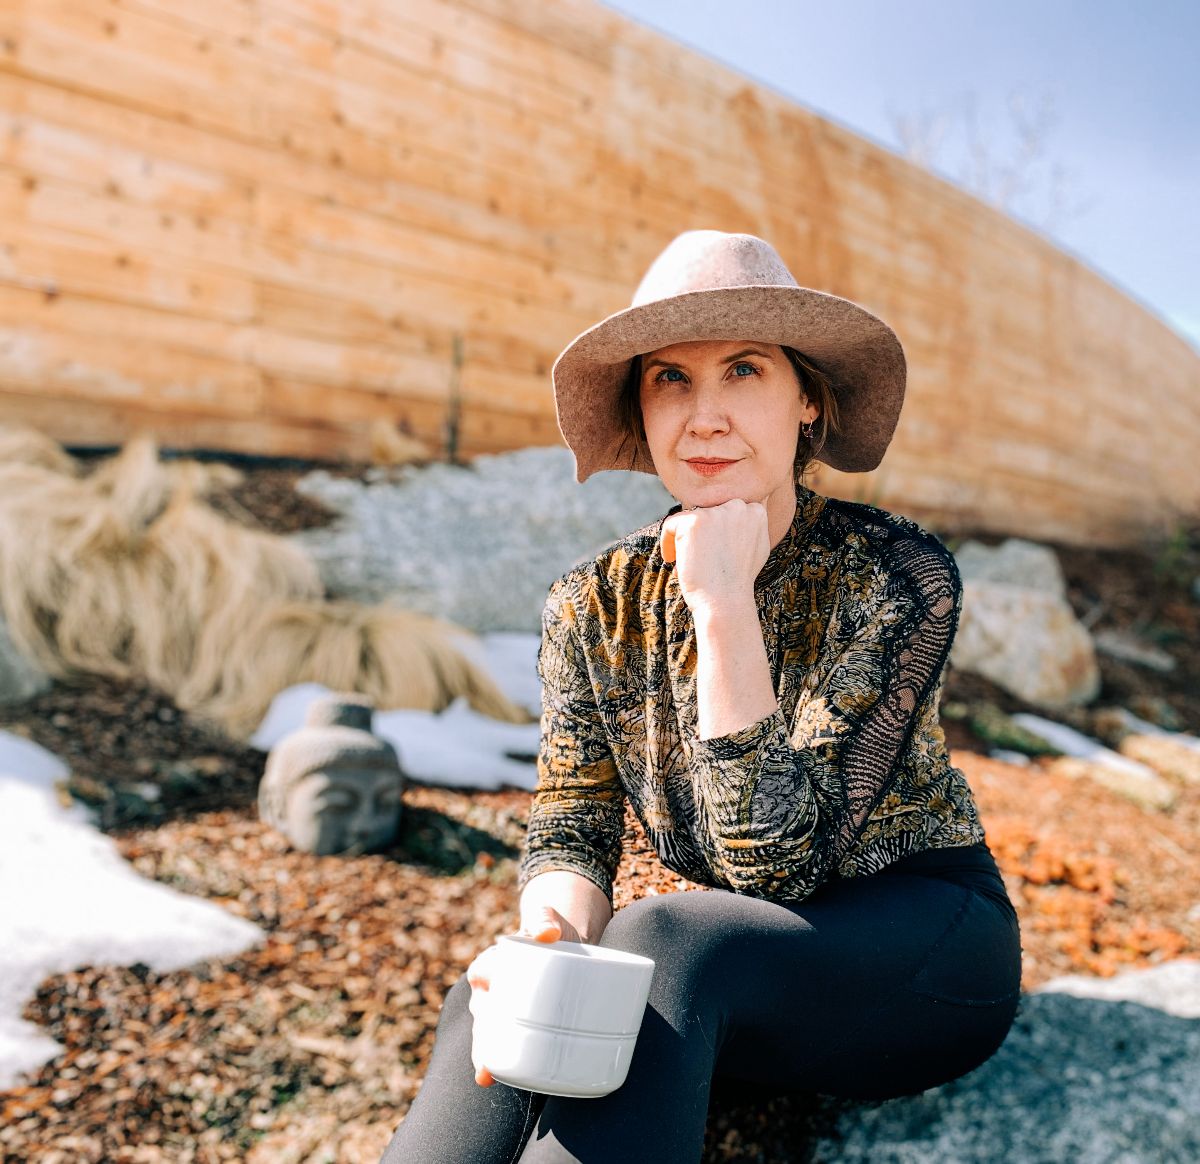 Carla Abate sitting in front of a rock formation, wearing a hat, and holding a mug